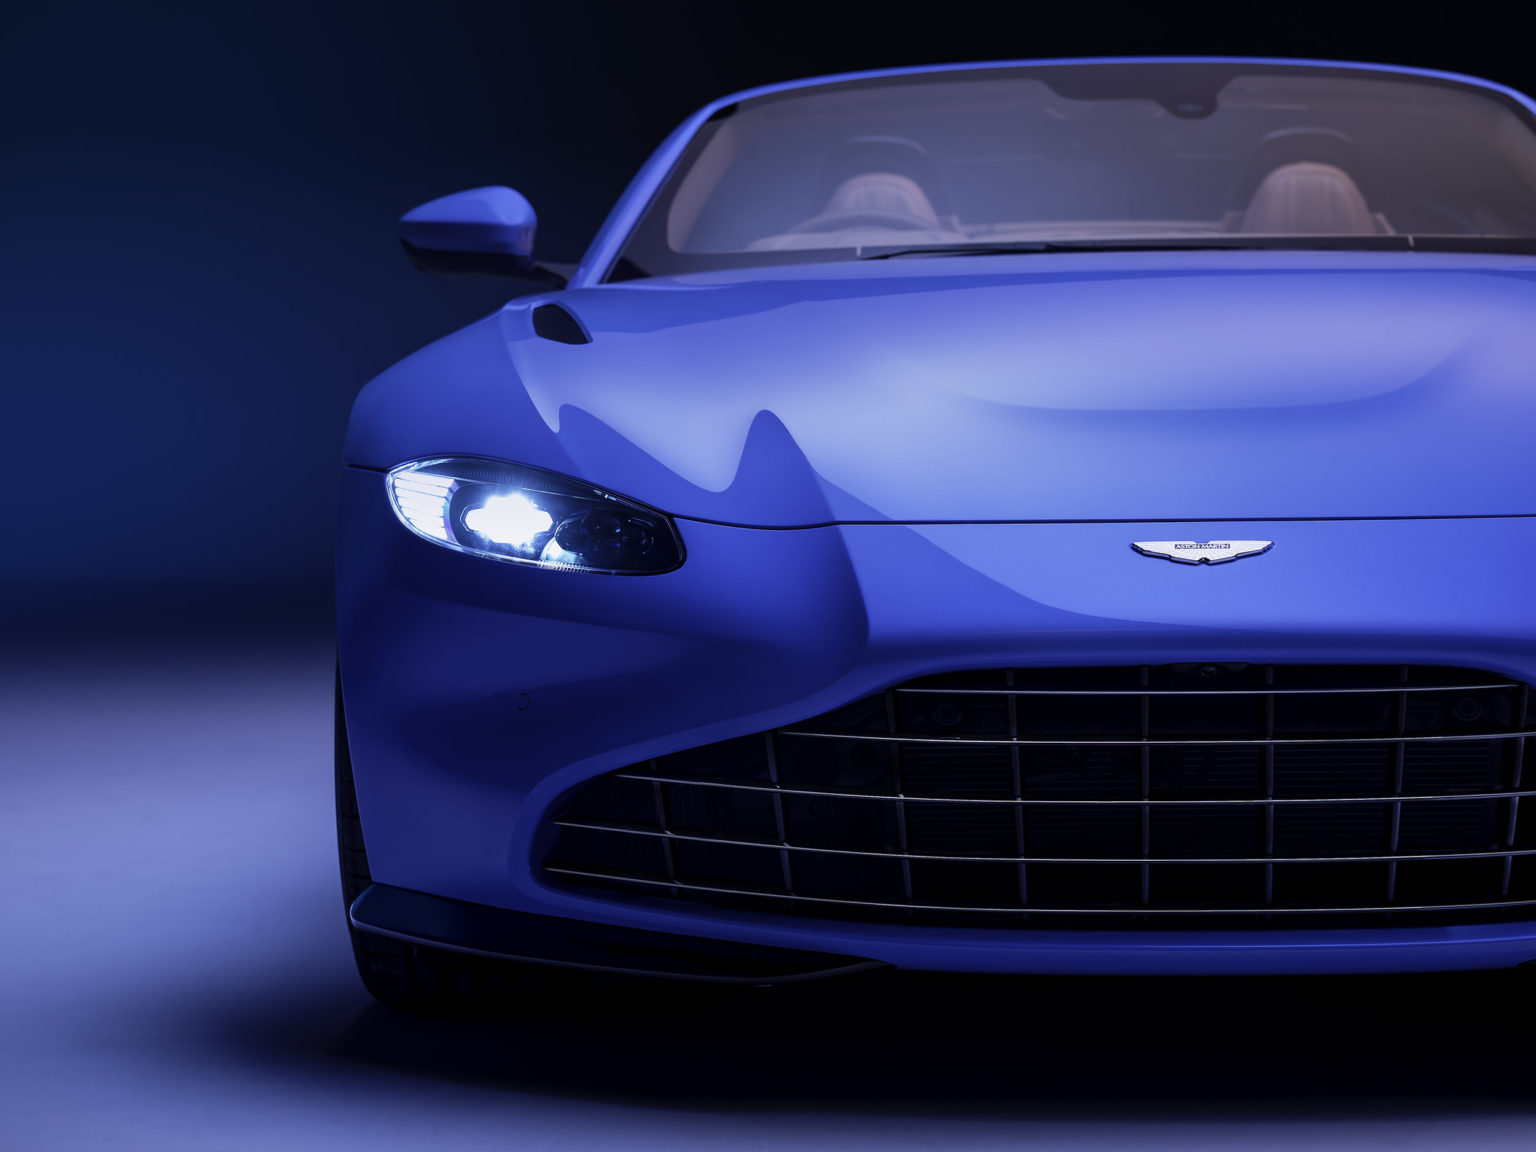 Aston Martin has debuted a convertible version of its Vantage coupe.